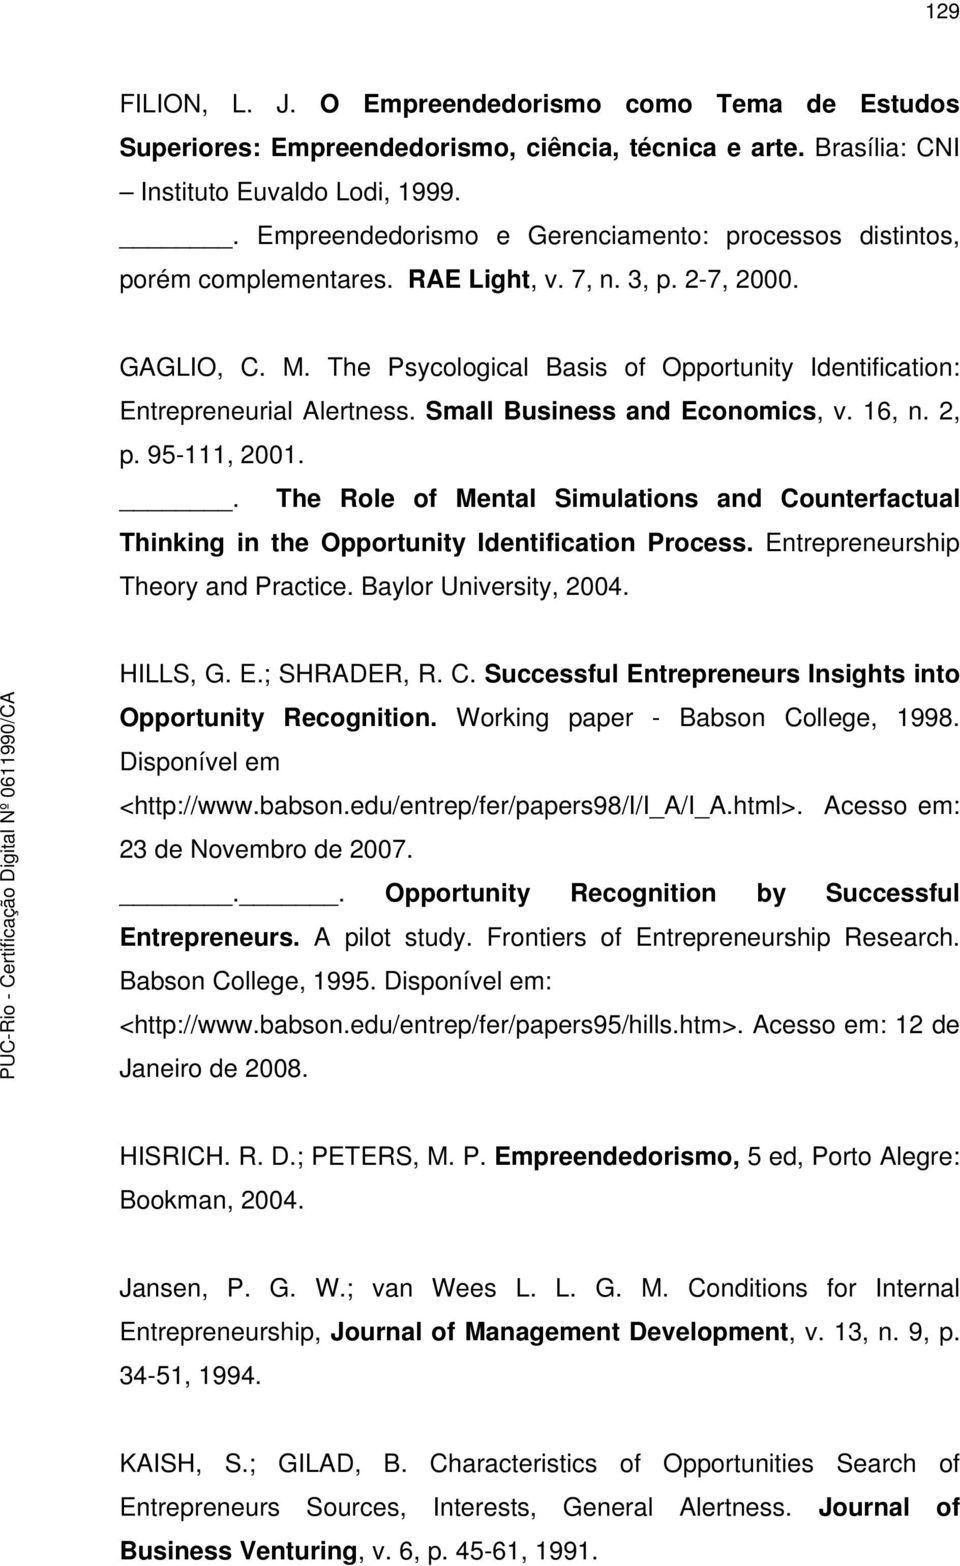 The Psycological Basis of Opportunity Identification: Entrepreneurial Alertness. Small Business and Economics, v. 16, n. 2, p. 95-111, 2001.